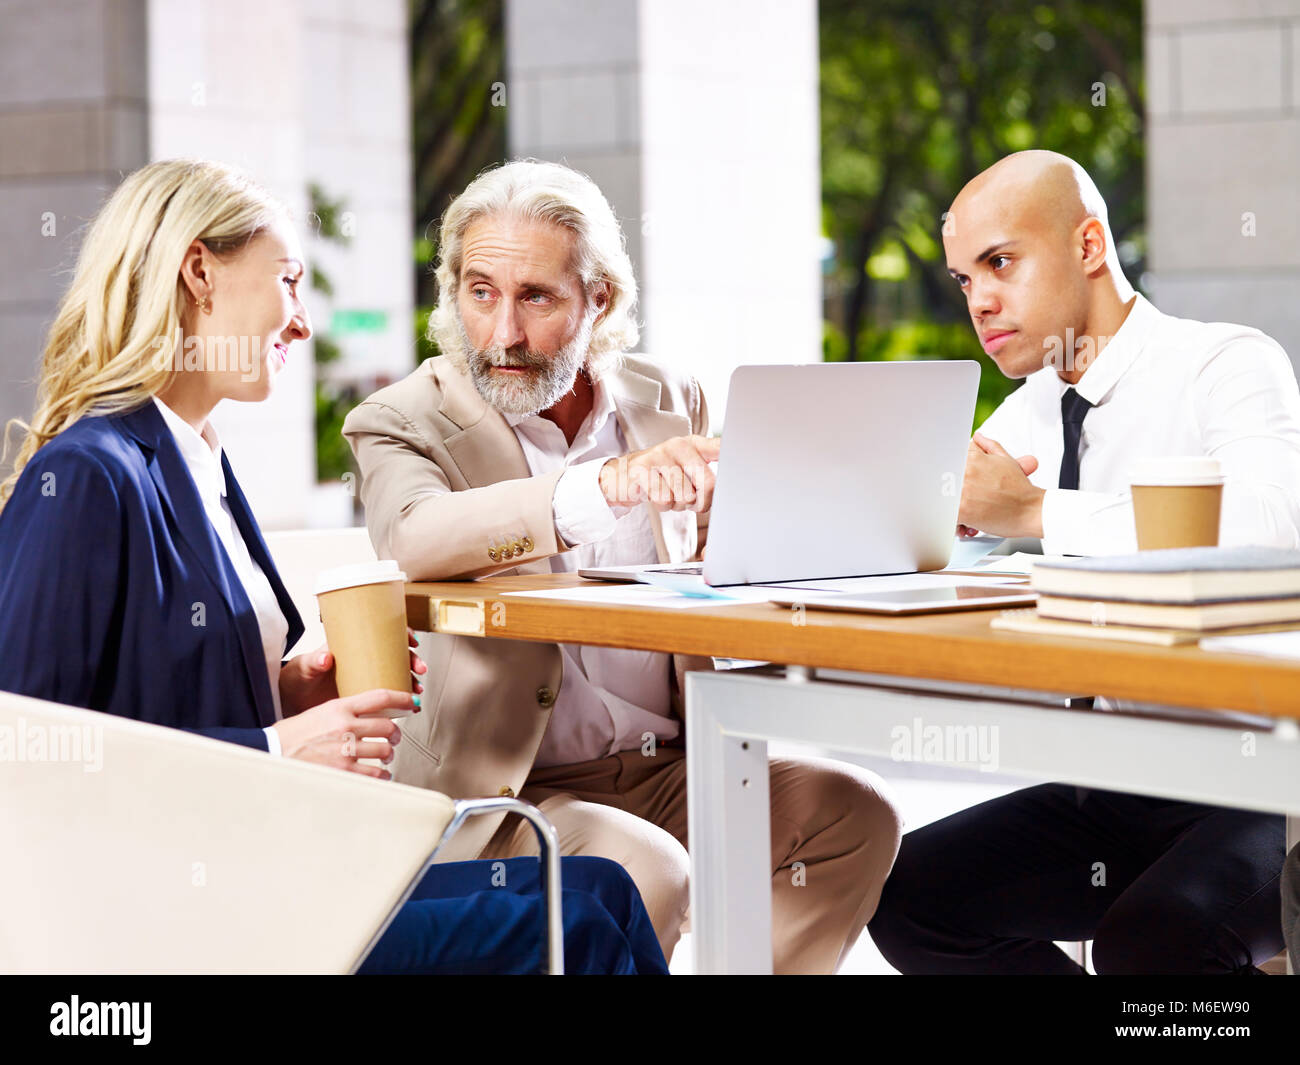 multinational and multiethnic corporate executives business people meeting in lobby of modern office building. Stock Photo